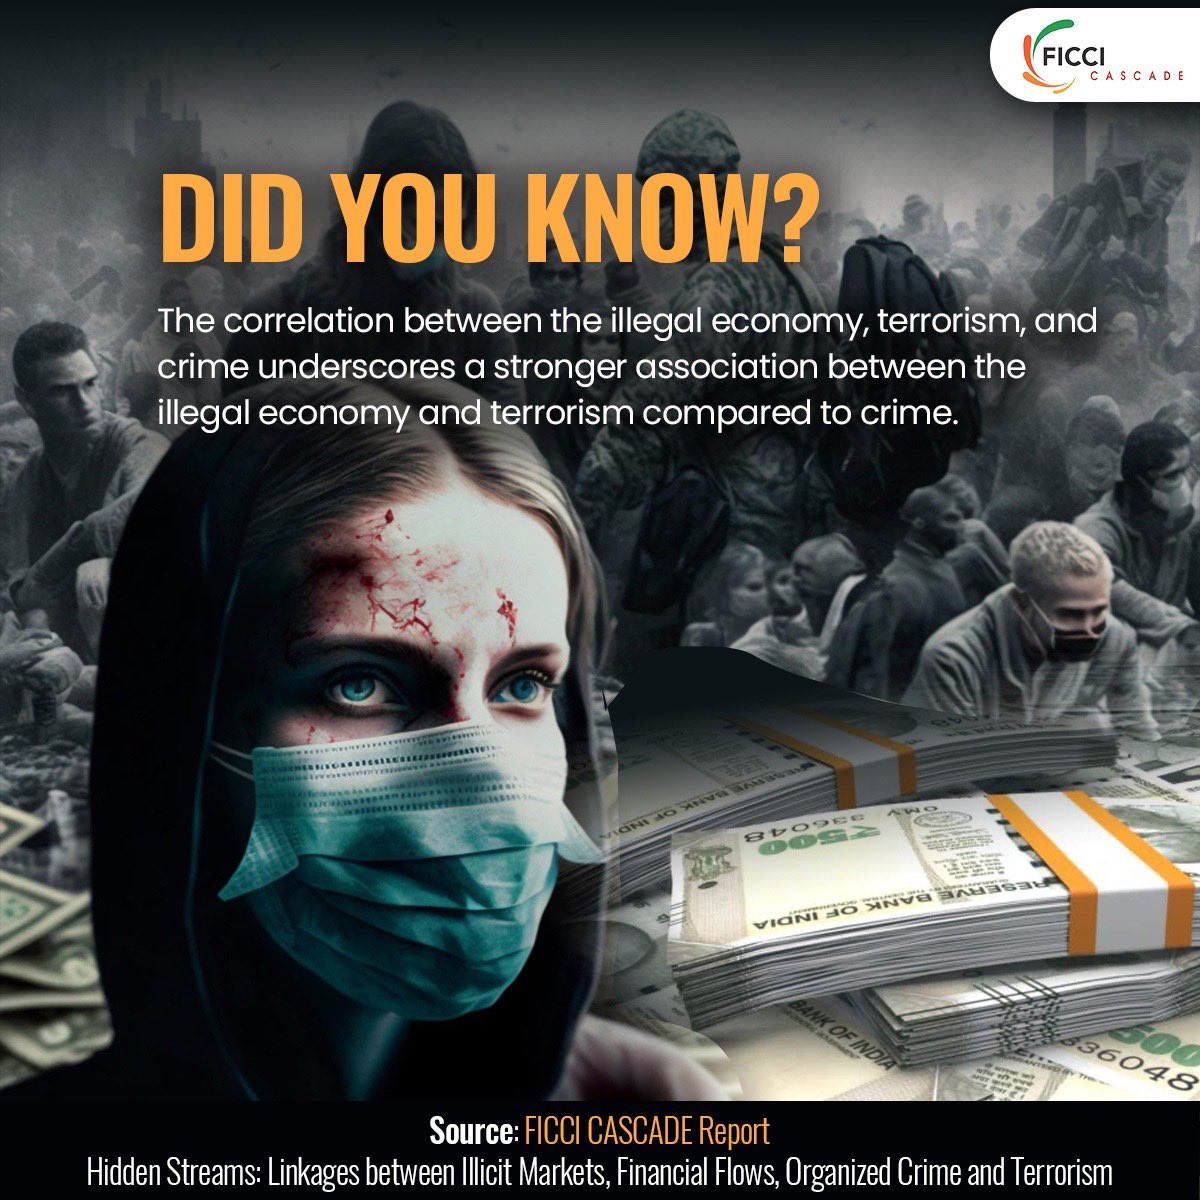 The illegal economy has a deeper connection with terrorism than any other crime! Learn more from the FICCI CASCADE Report Hidden Streams: Linkages between Illicit Markets, Financial Flows, Organized Crime and Terrorism #IllegalEconomy #TerrorismConnection #FICCIReport…